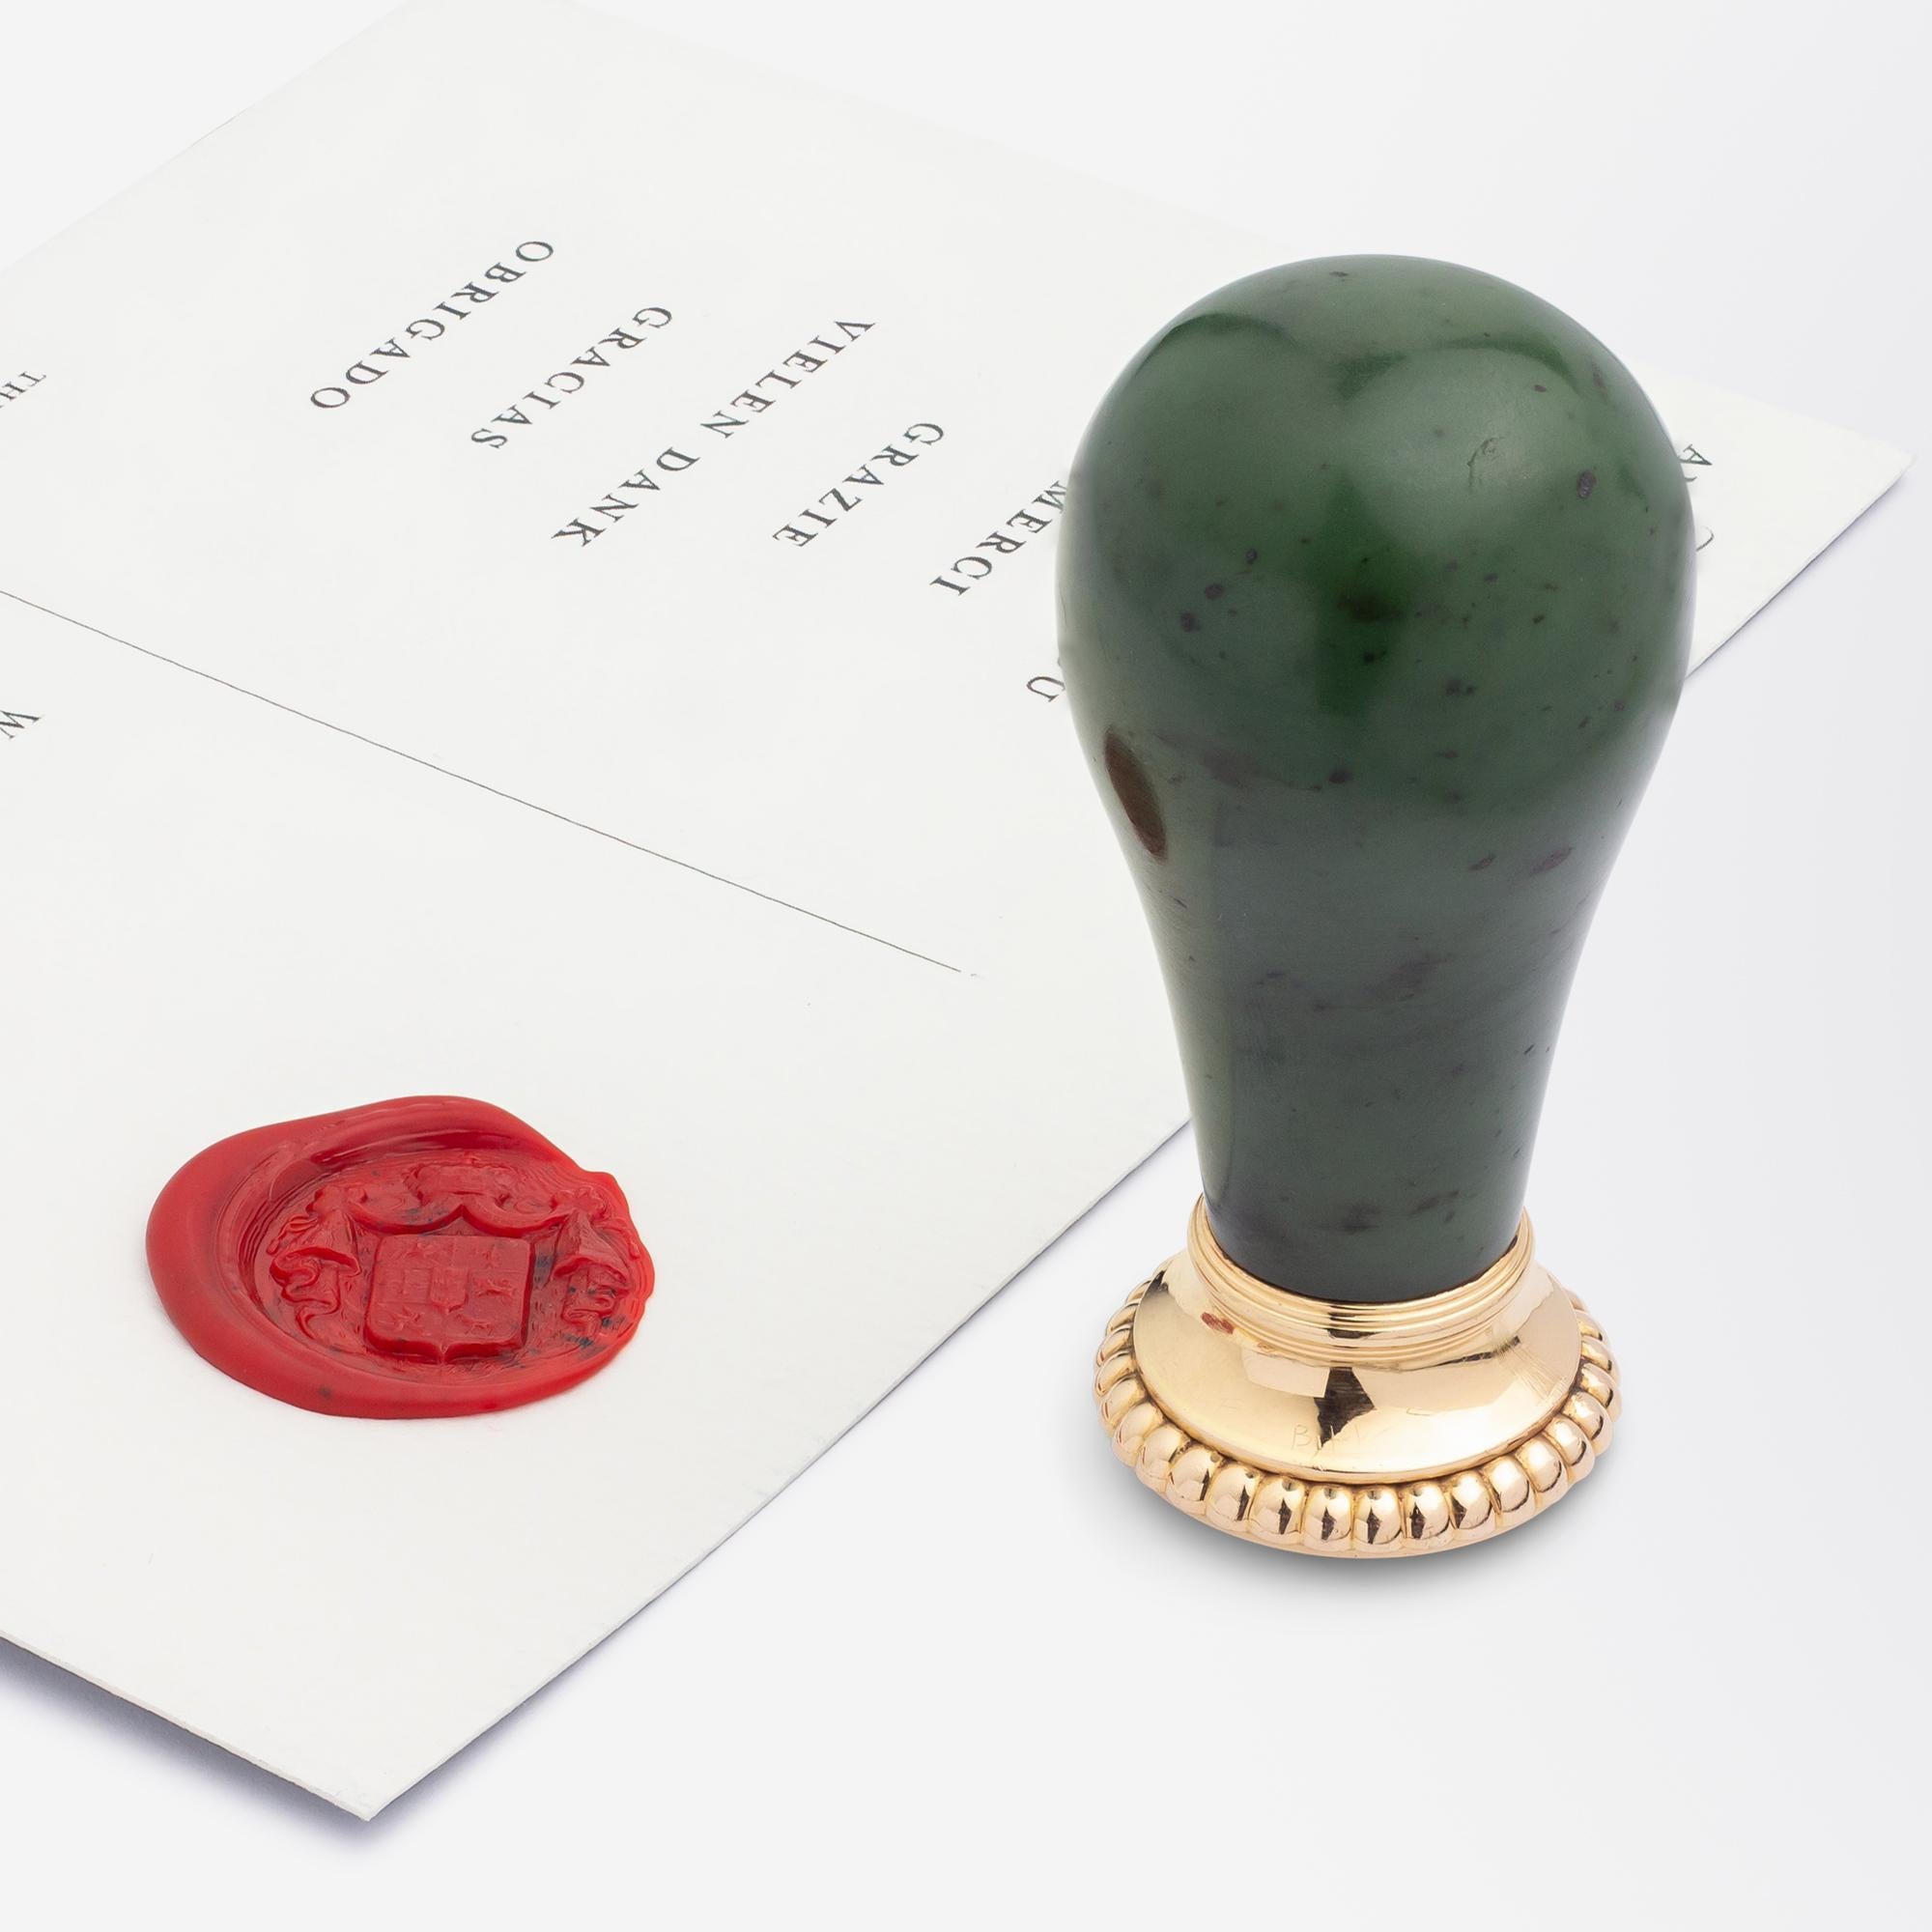 This magnificent desk seal dates to Russia pre the 1917 revolution and is crafted from nephrite jade, gold and a carved white chalcedony intaglio. The pommel form nephrite jade handle sits above a gold mount which has gadrooning to the rim and